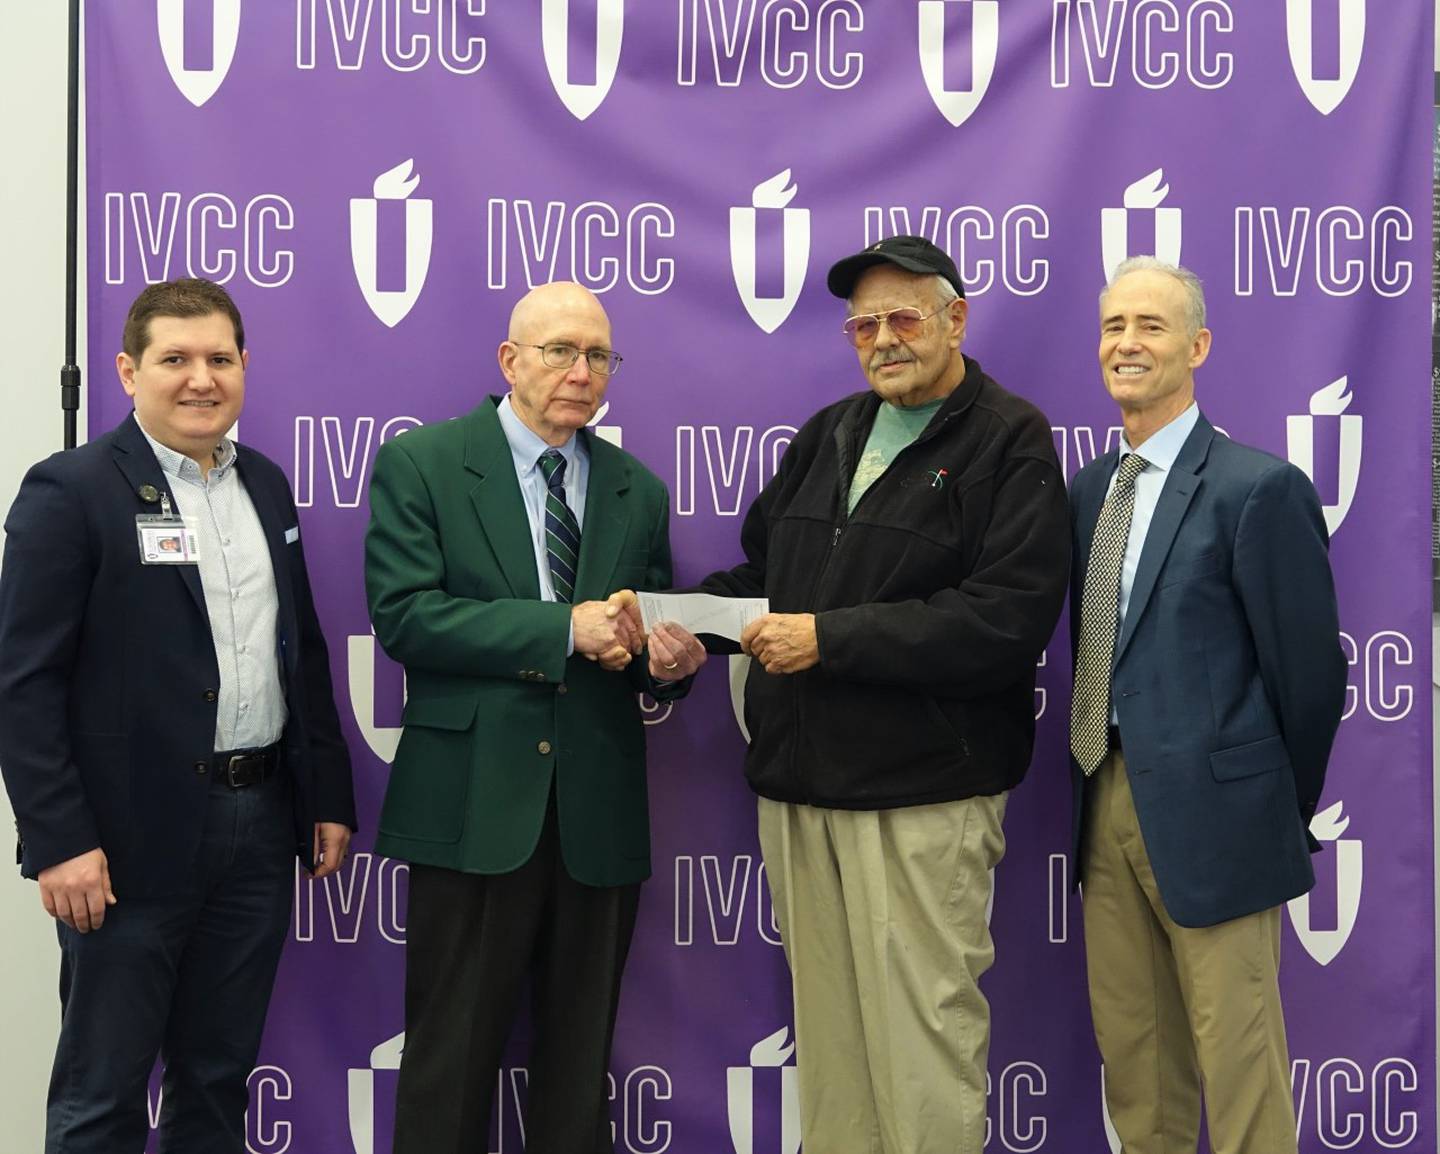 IVCC Dean of Humanities, Fine Arts and Social Sciences Lirim Neziroski, left, President Jerry Corcoran, Glen Gerrard and Executive Director of Community Relations and Development Fran Brolley.